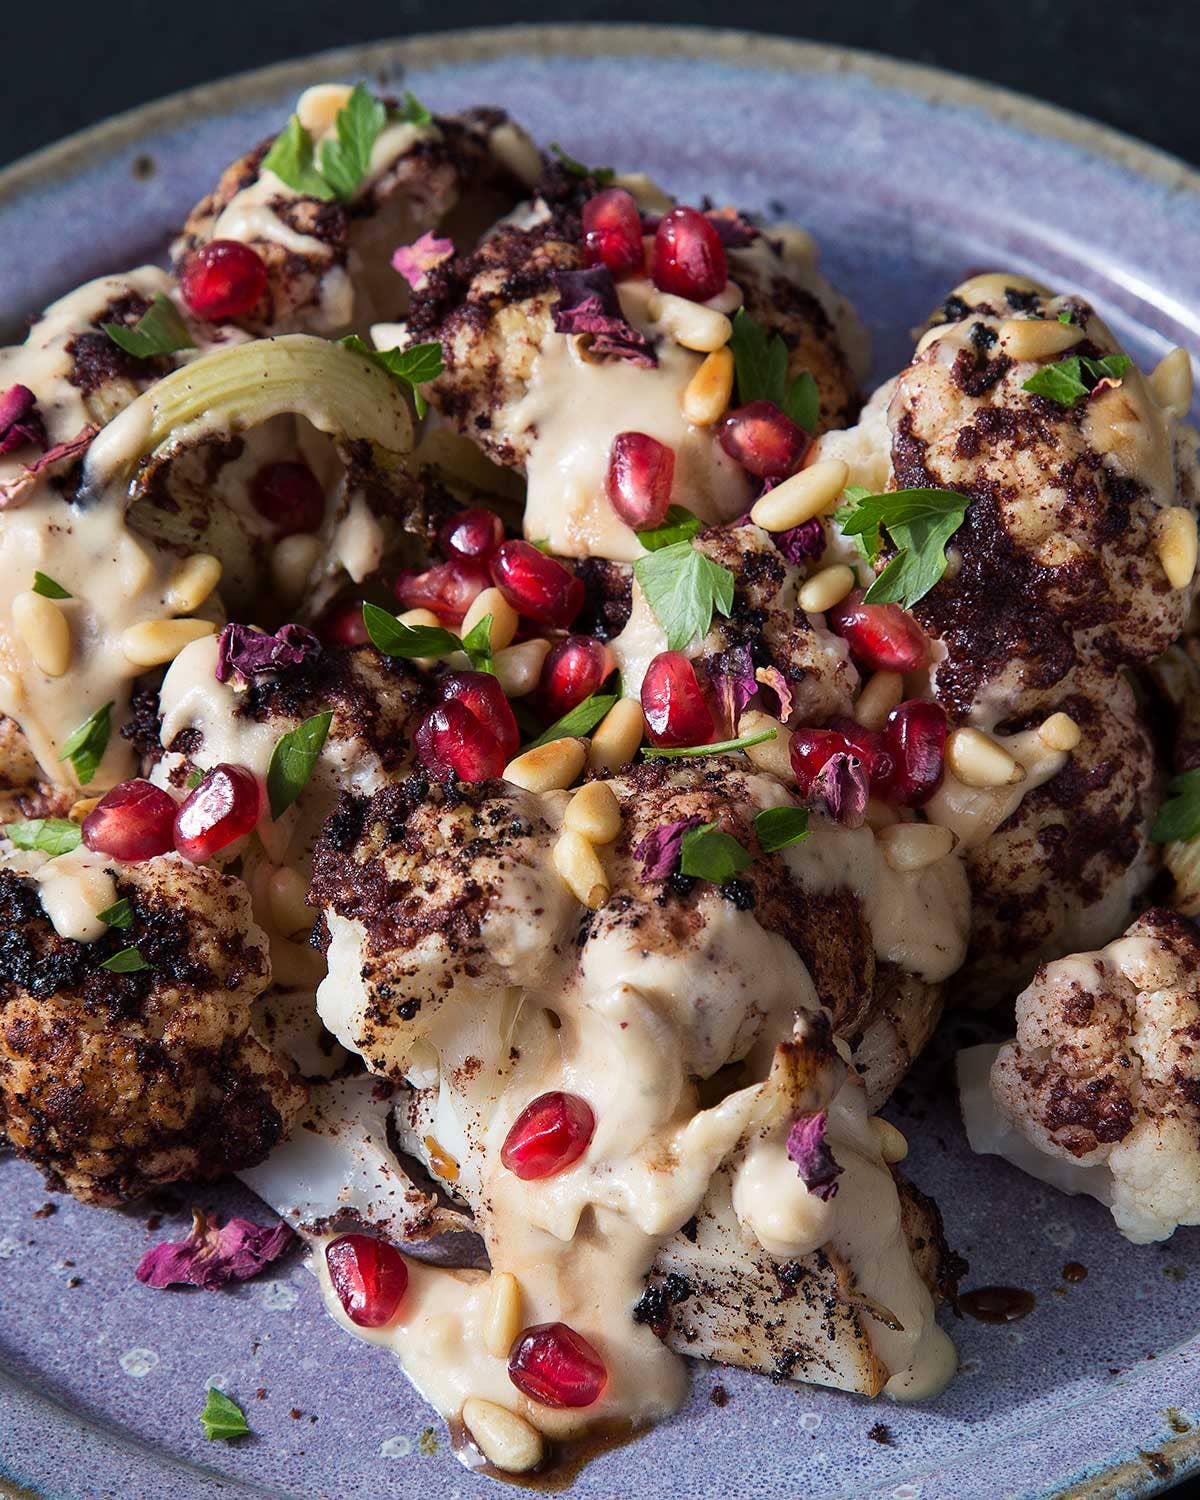 How to Make Shawarma Out of Cauliflower